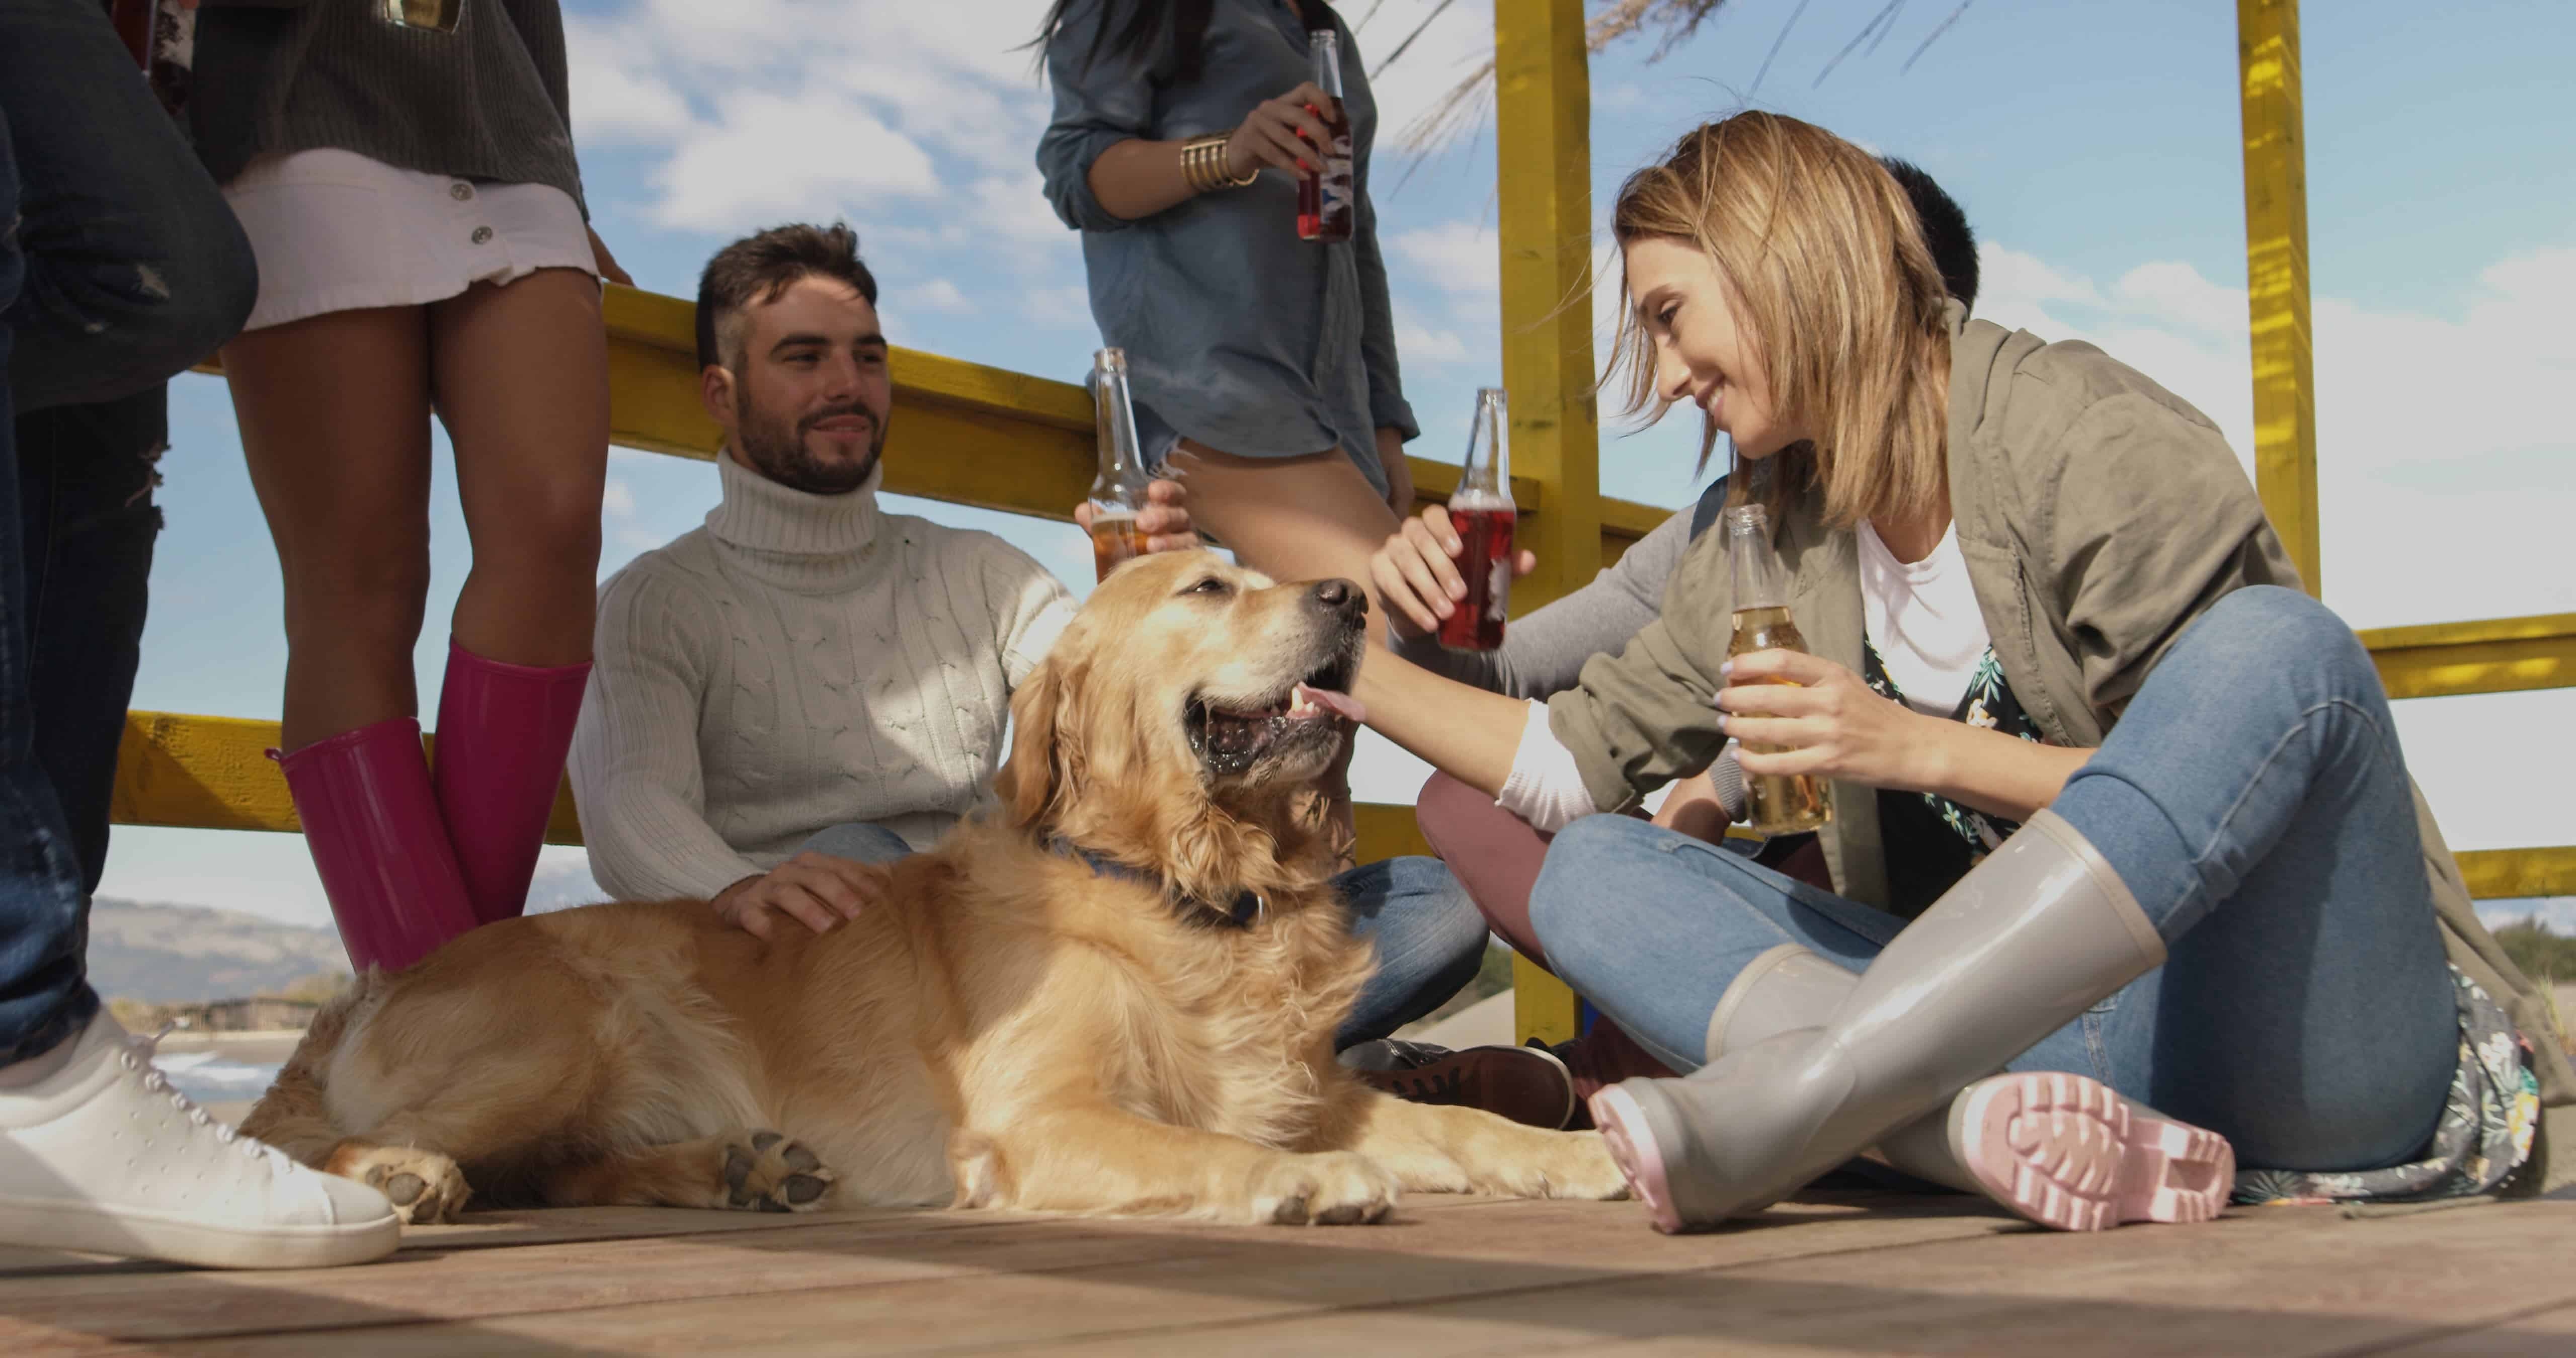 Golden retriever at beach party. Dogs make people more social by serving as icebreakers and conversation starters. They also ease tension and make people feel more calm and assured.